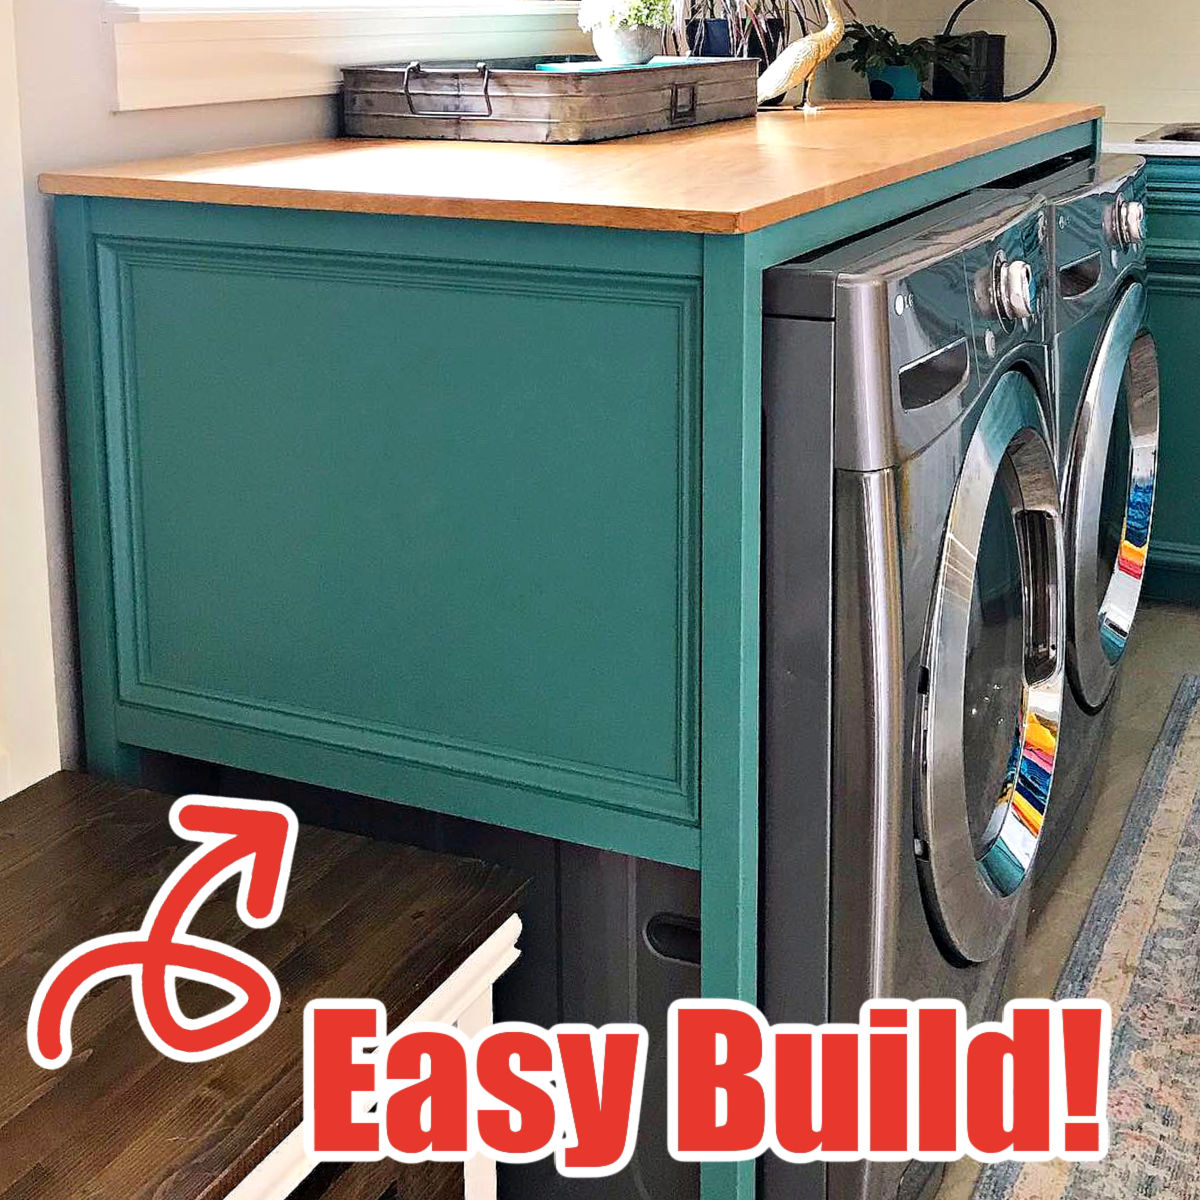 How to Make a Simple Laundry Room Fold Table